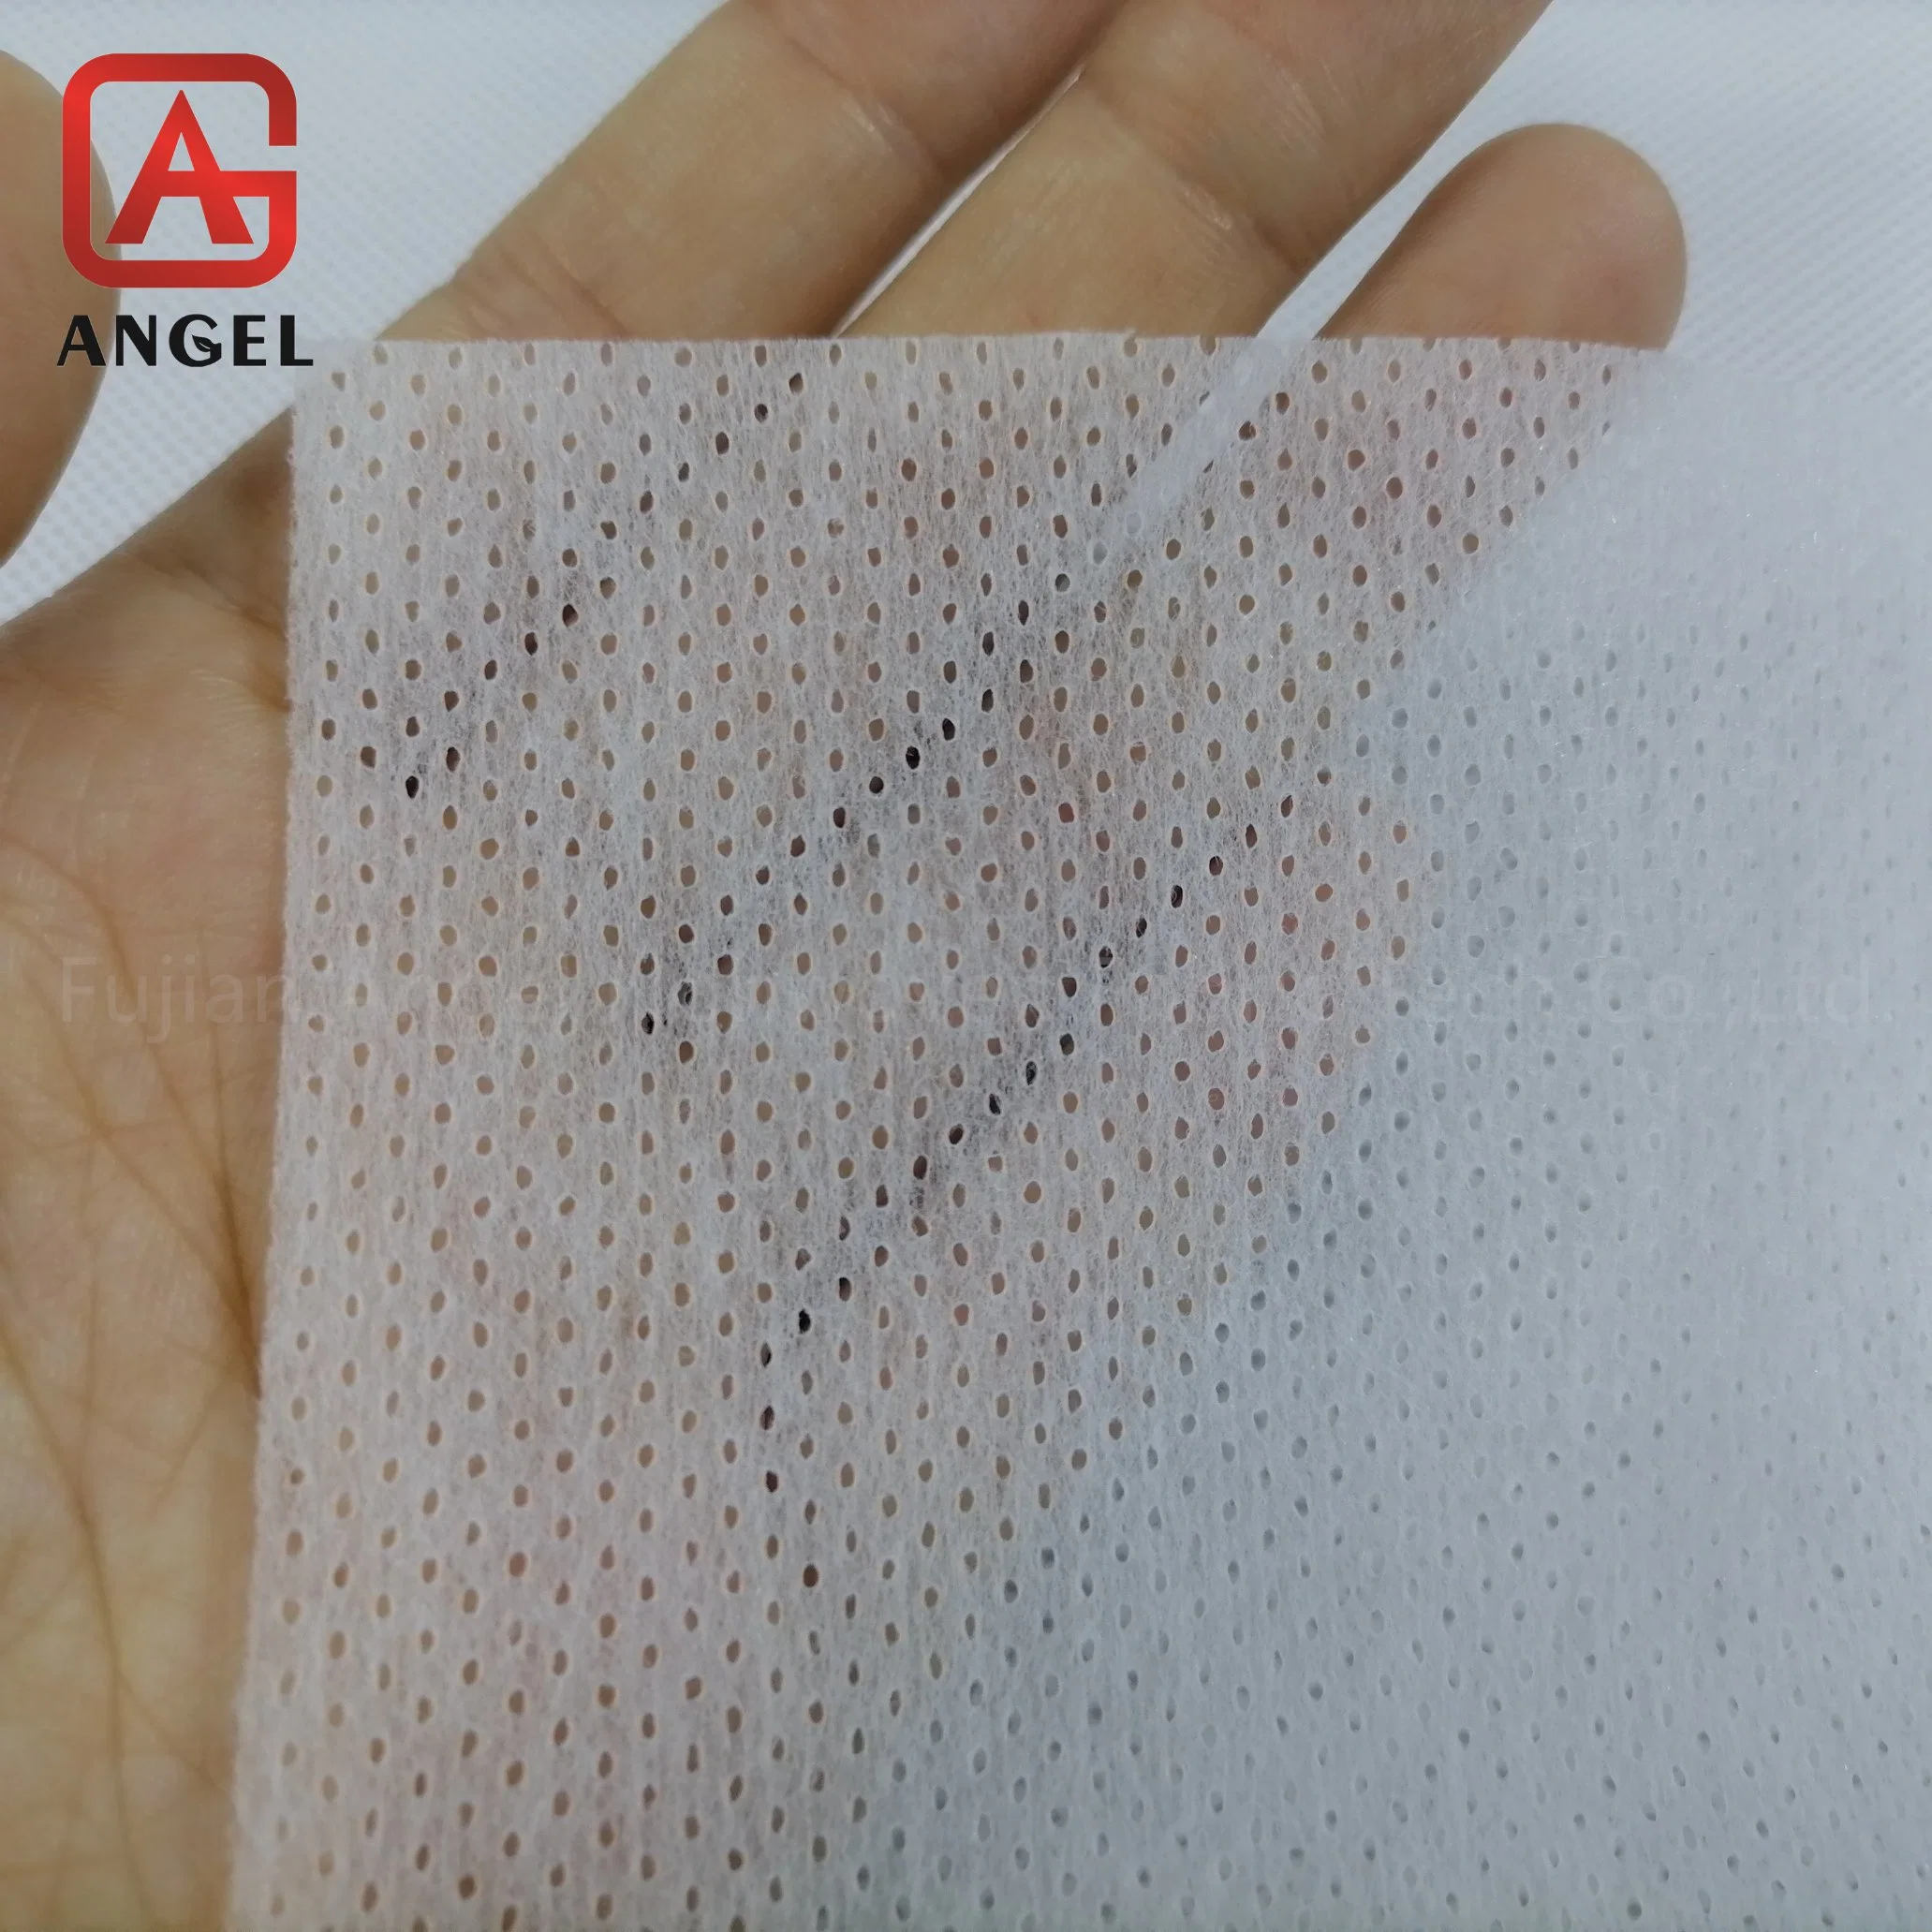 Wholesale Adl Nonwoven Fabric for Diaper and Sanitary Napkin